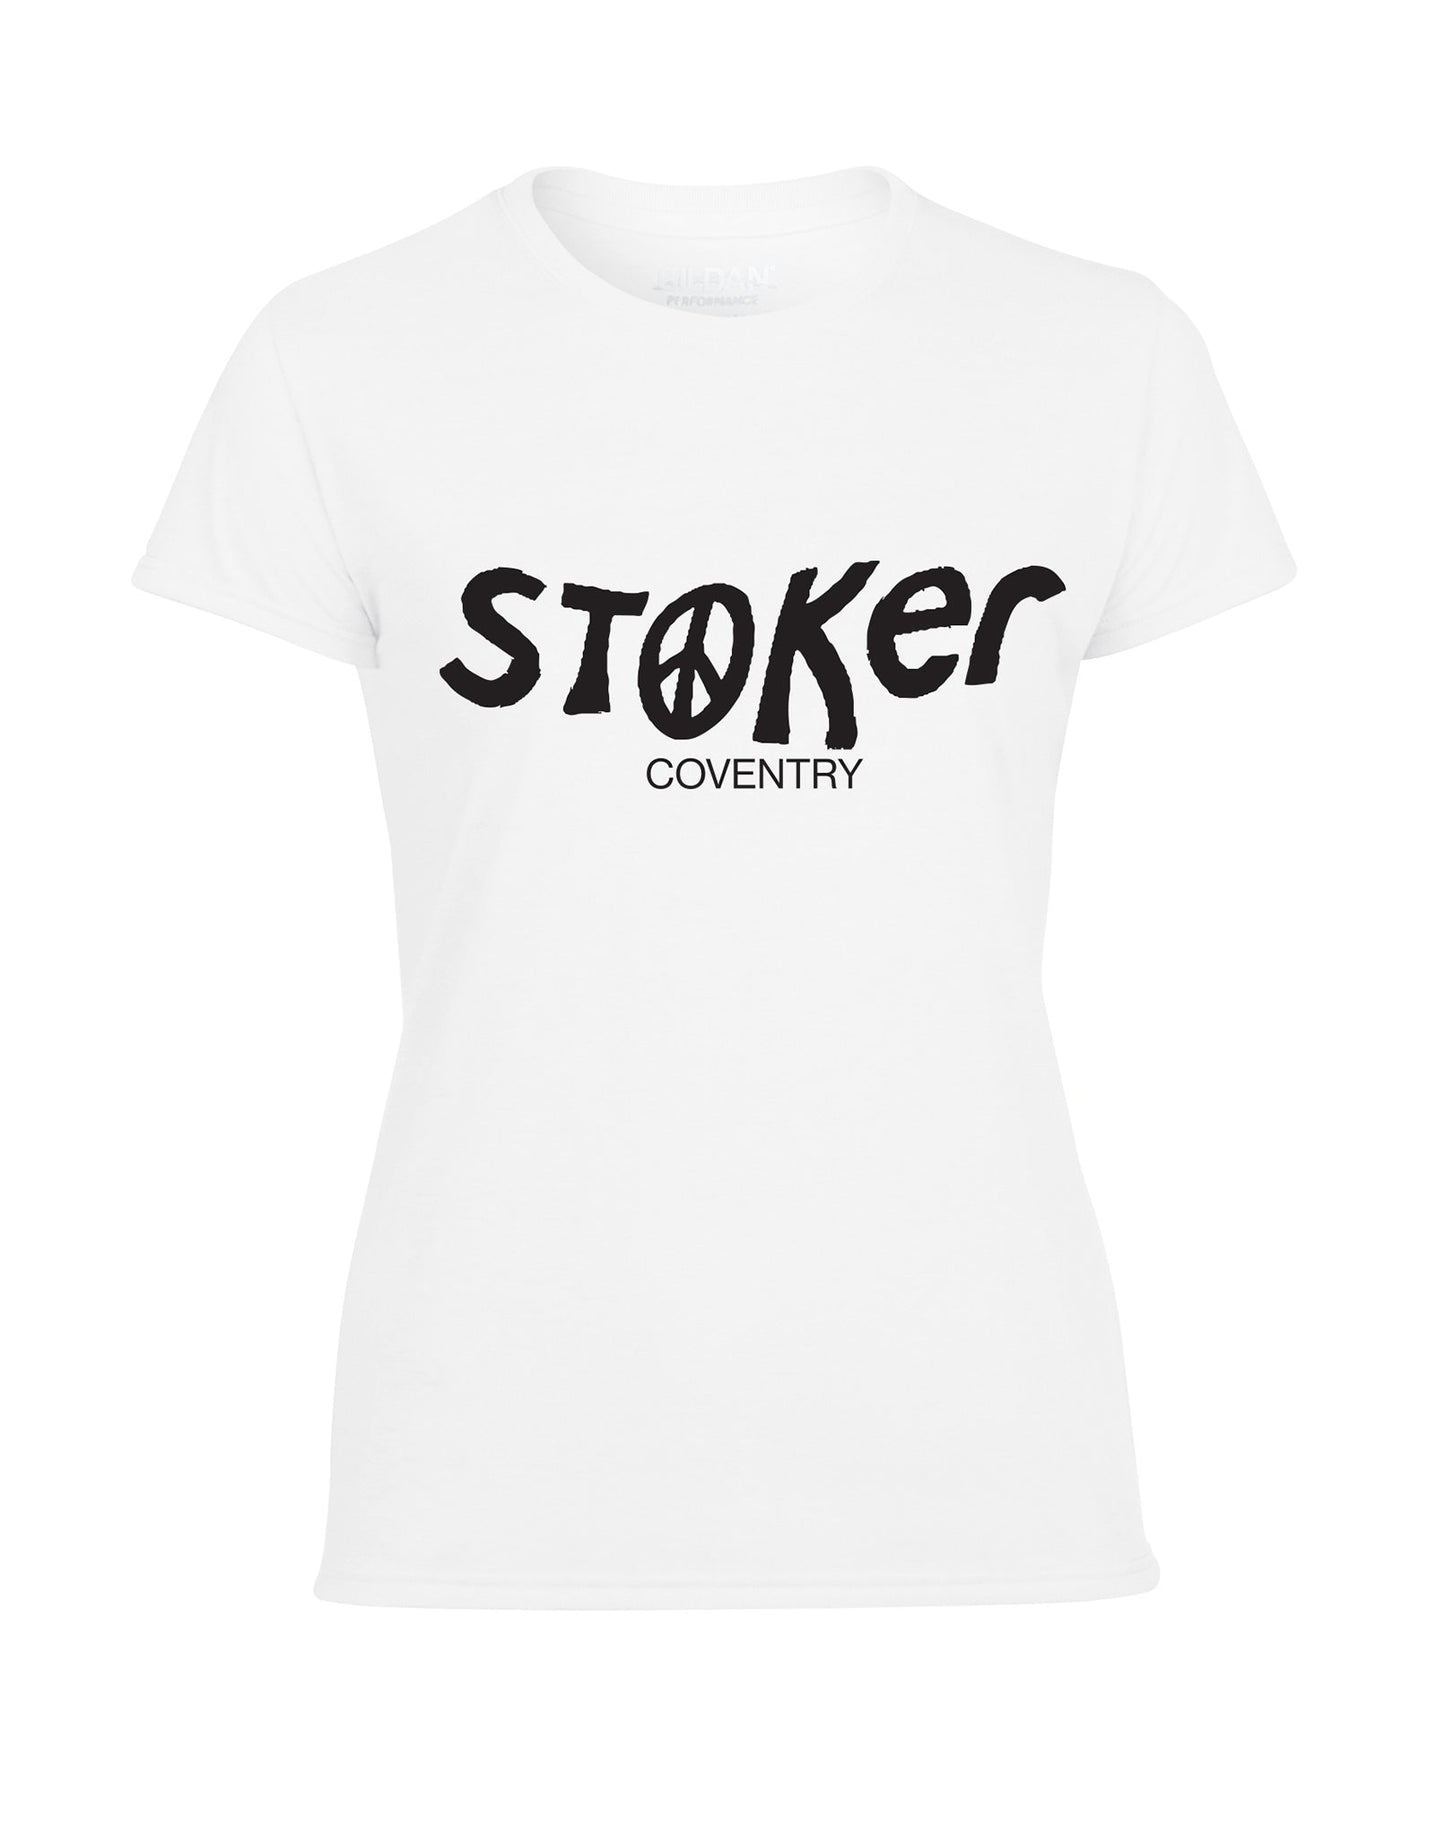 Stoker ladies fit t-shirt- various colours - Dirty Stop Outs